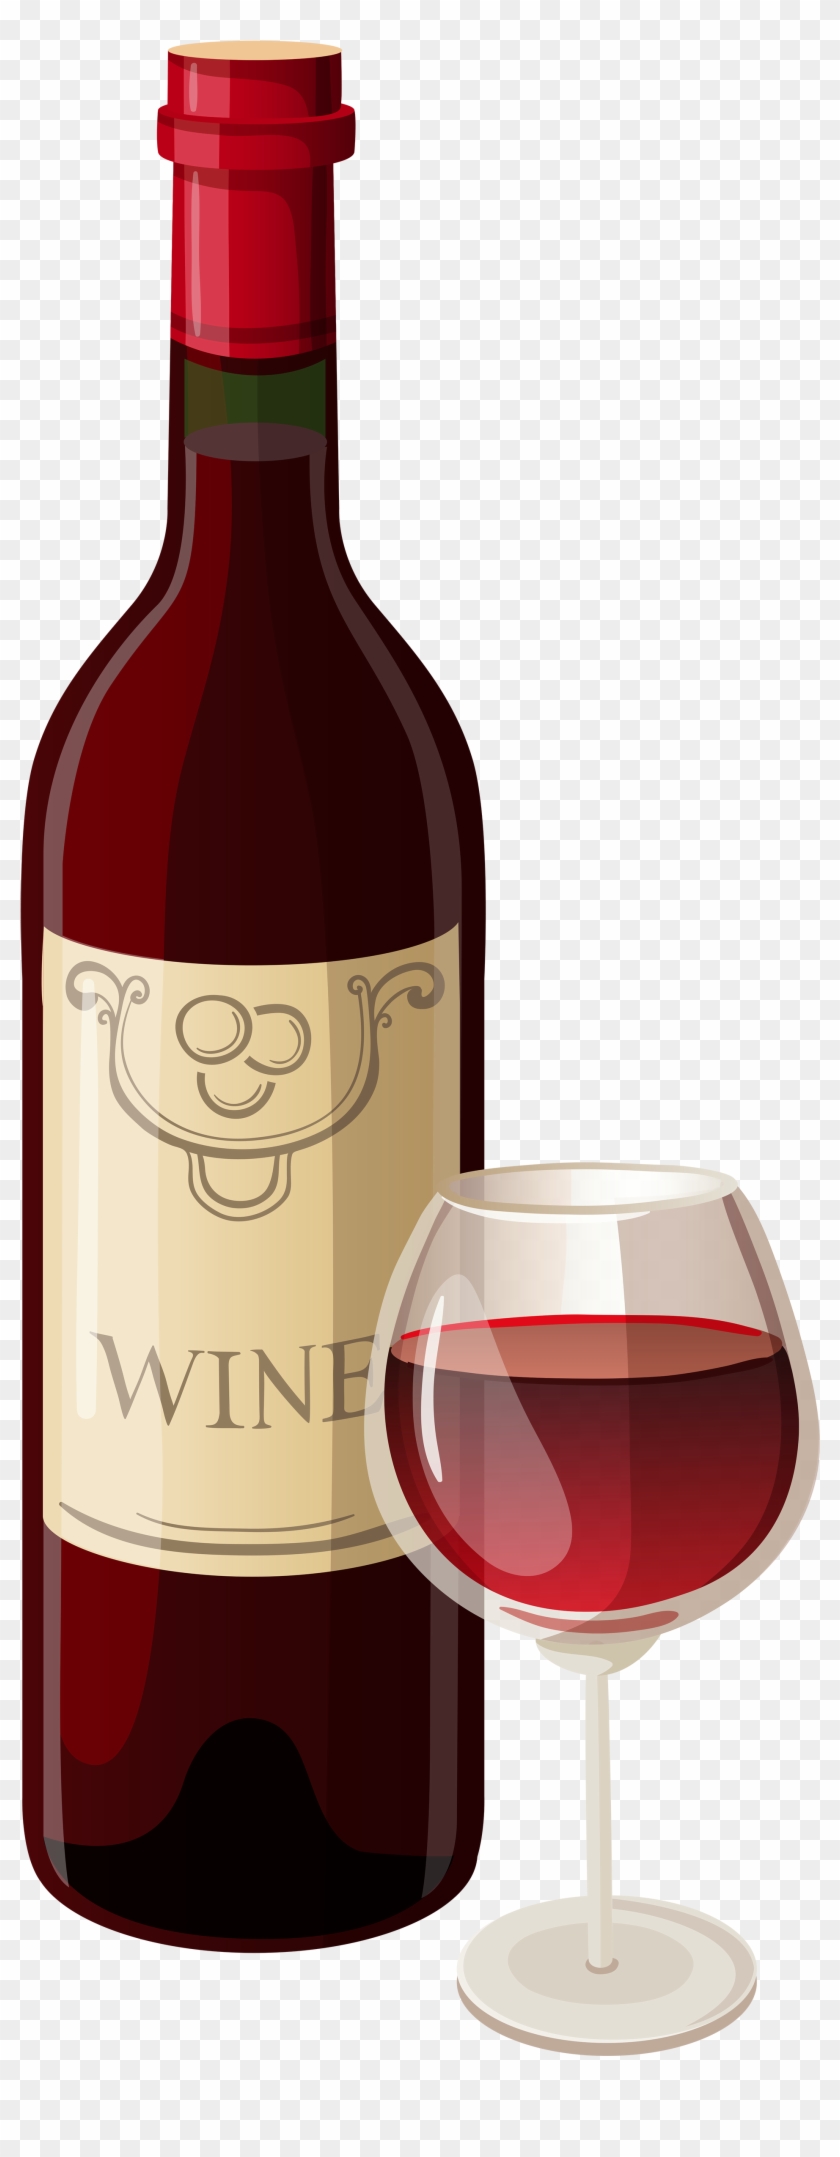 Wine Png Images Free Download, Wine Glass Png - Transparent Wine Bottle Clipart